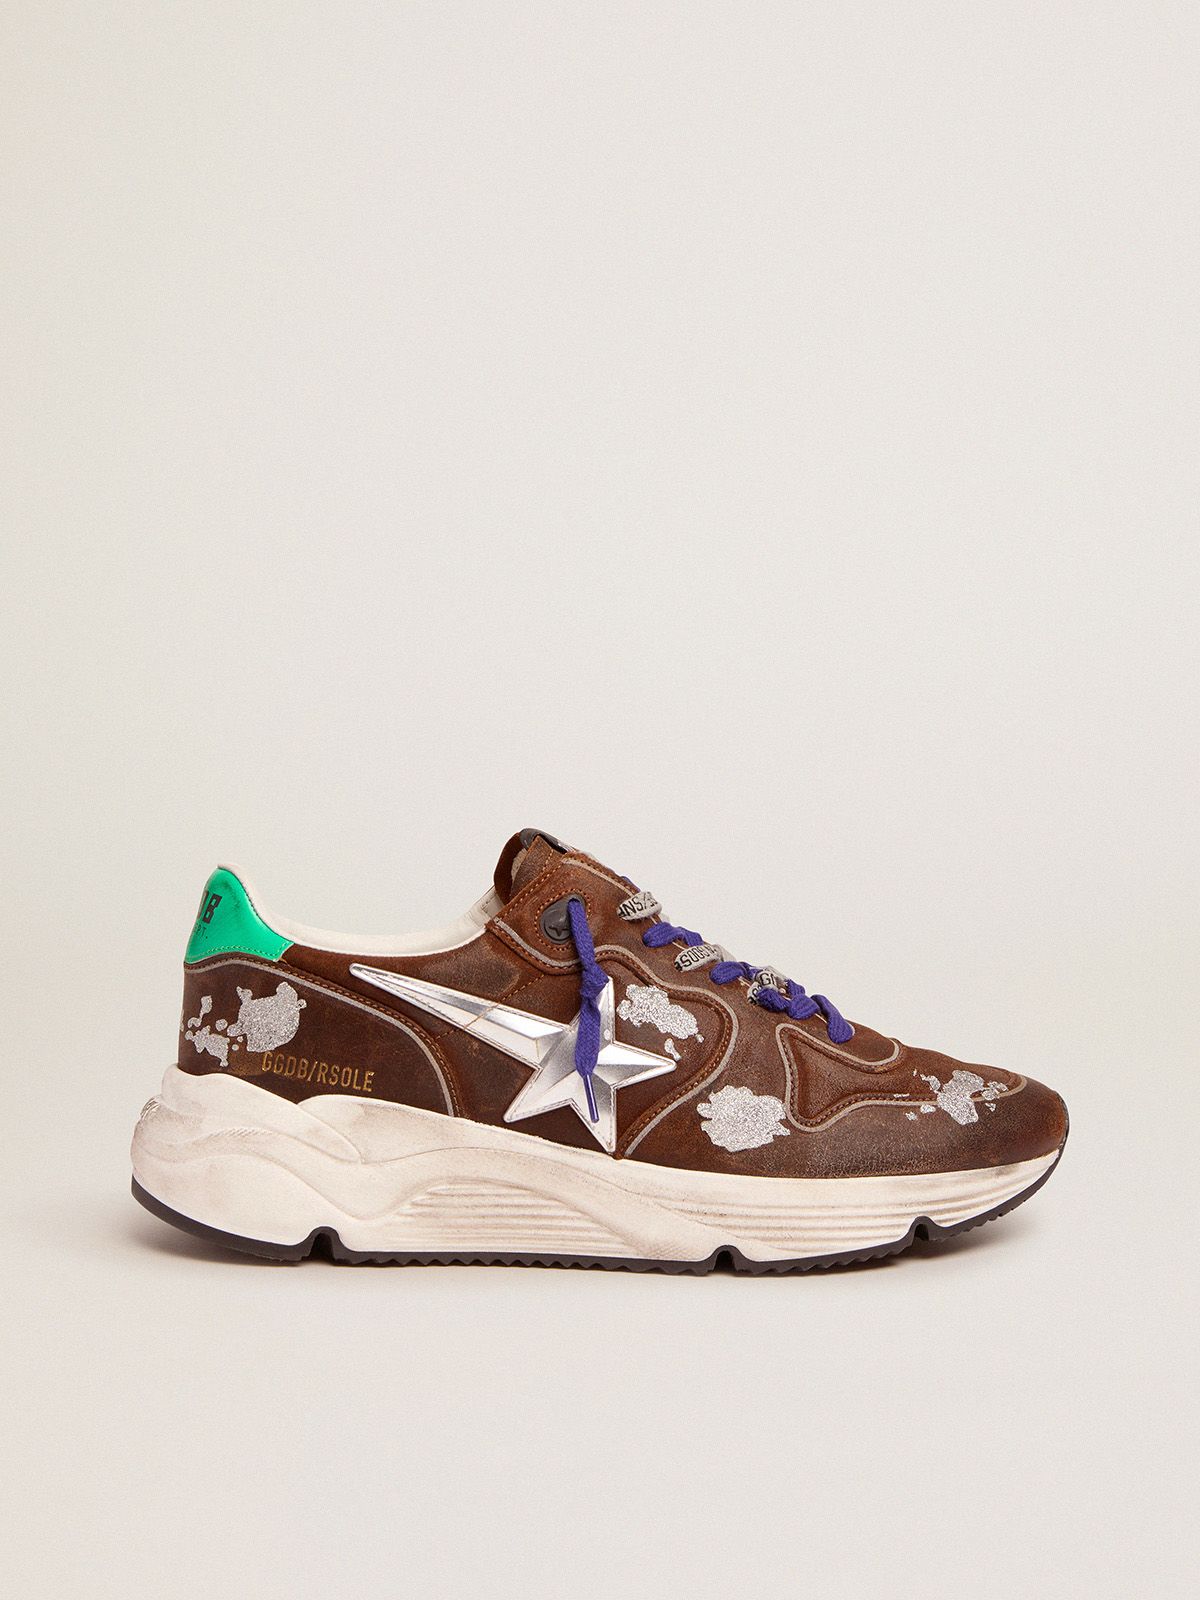 golden goose Sole in cognac-colored 3D with sneakers suede Running star